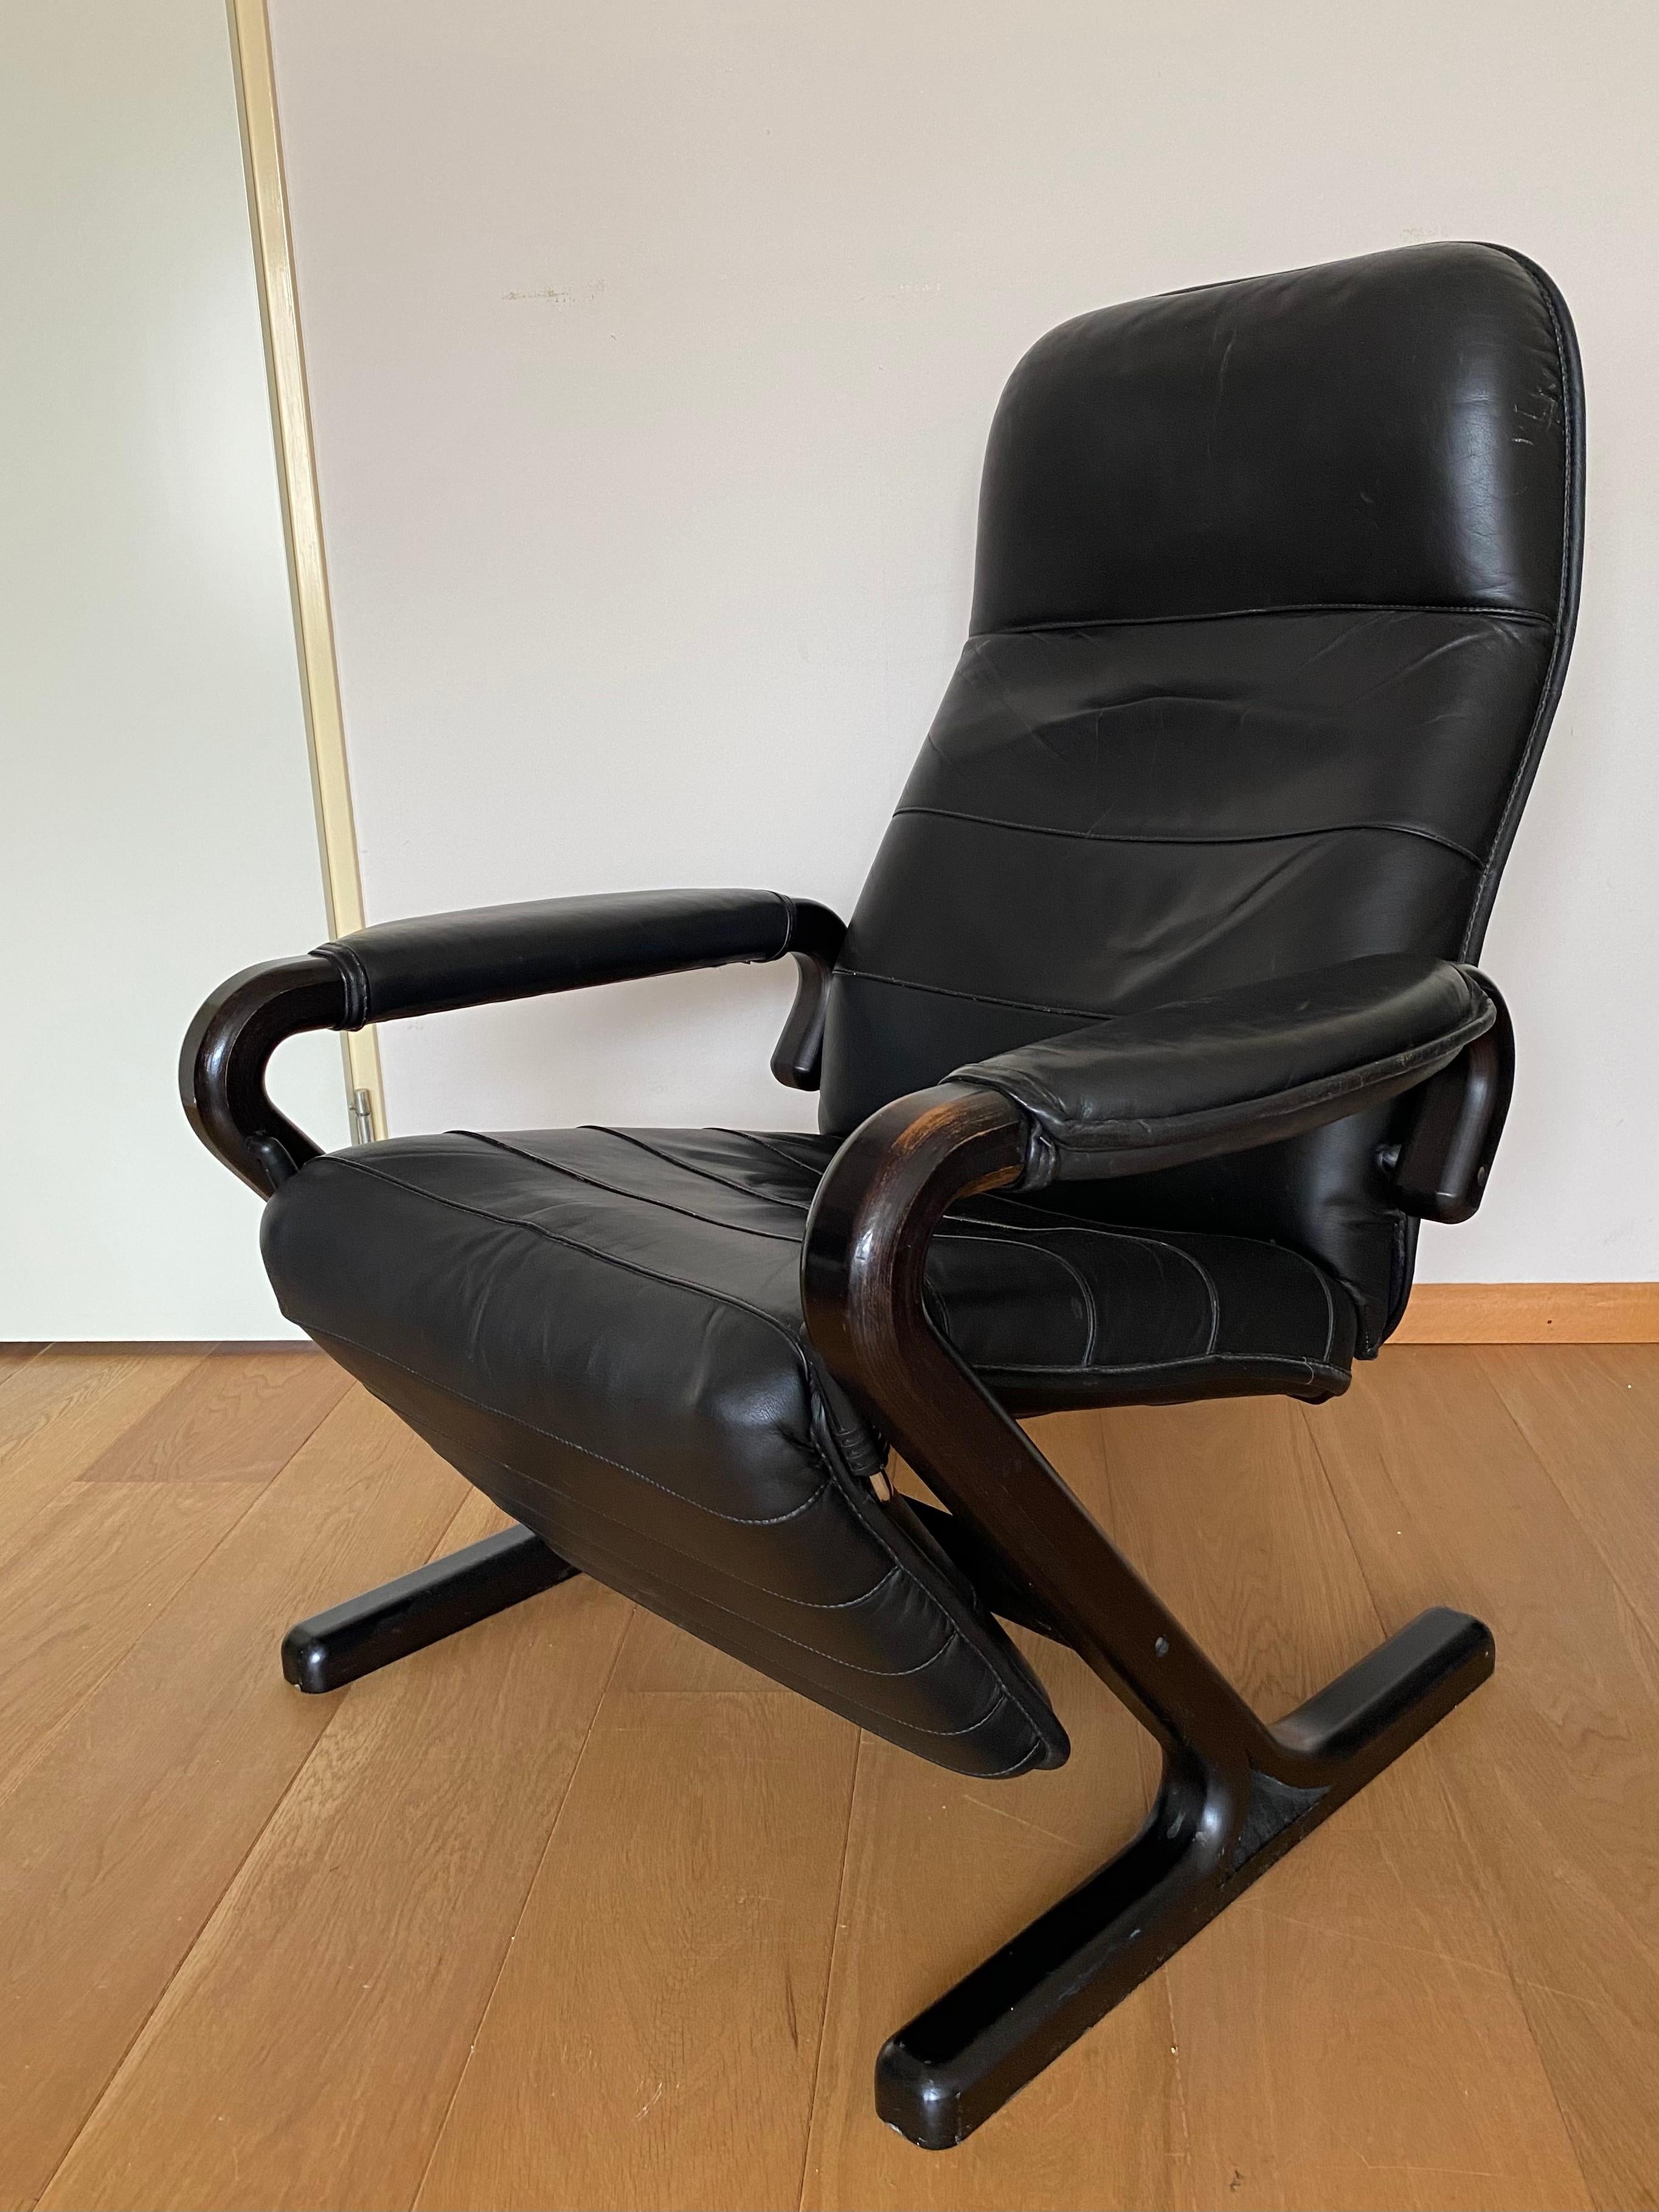 Exceptional Recliner chair, upholstered in Black leather. The chair comes with a Lacquered Bentwood base. Designer and manufacturer remain unknown however the piece resembles designs of Ammanati and Vitelli for Moroso and De sede. In good condition